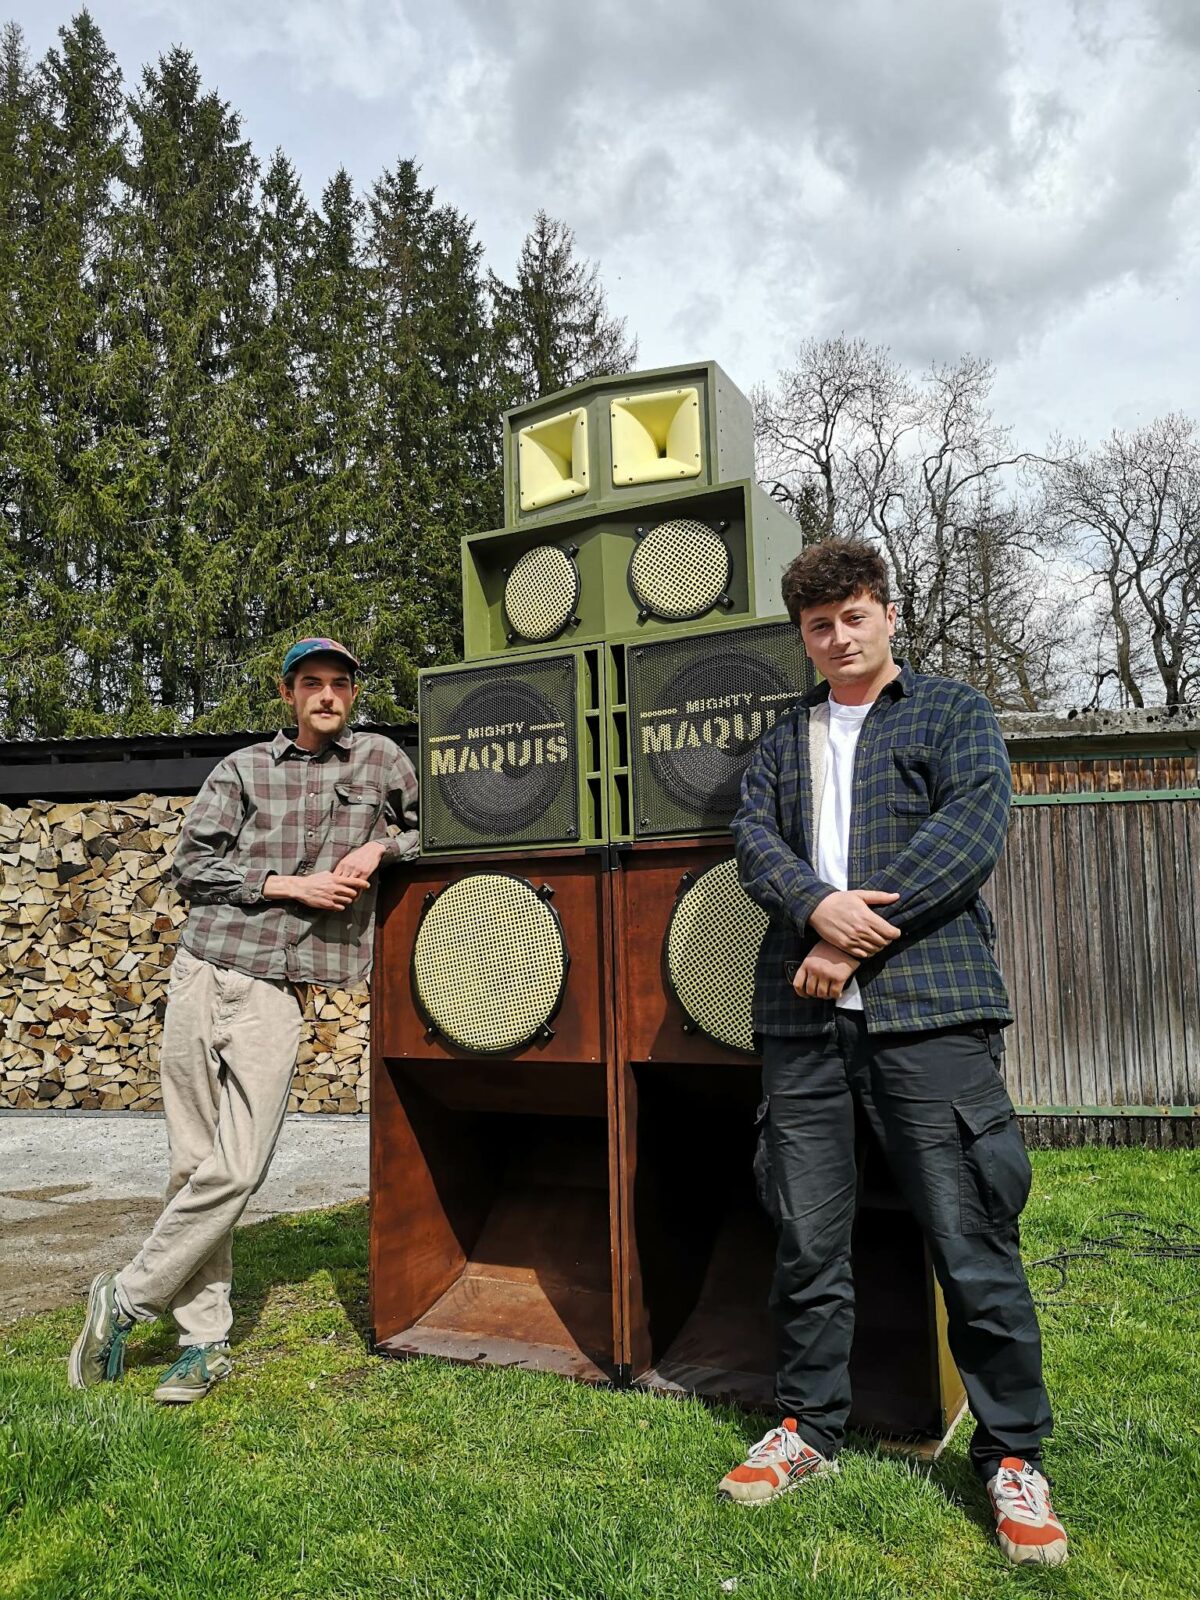 Mighty Maquis sound system